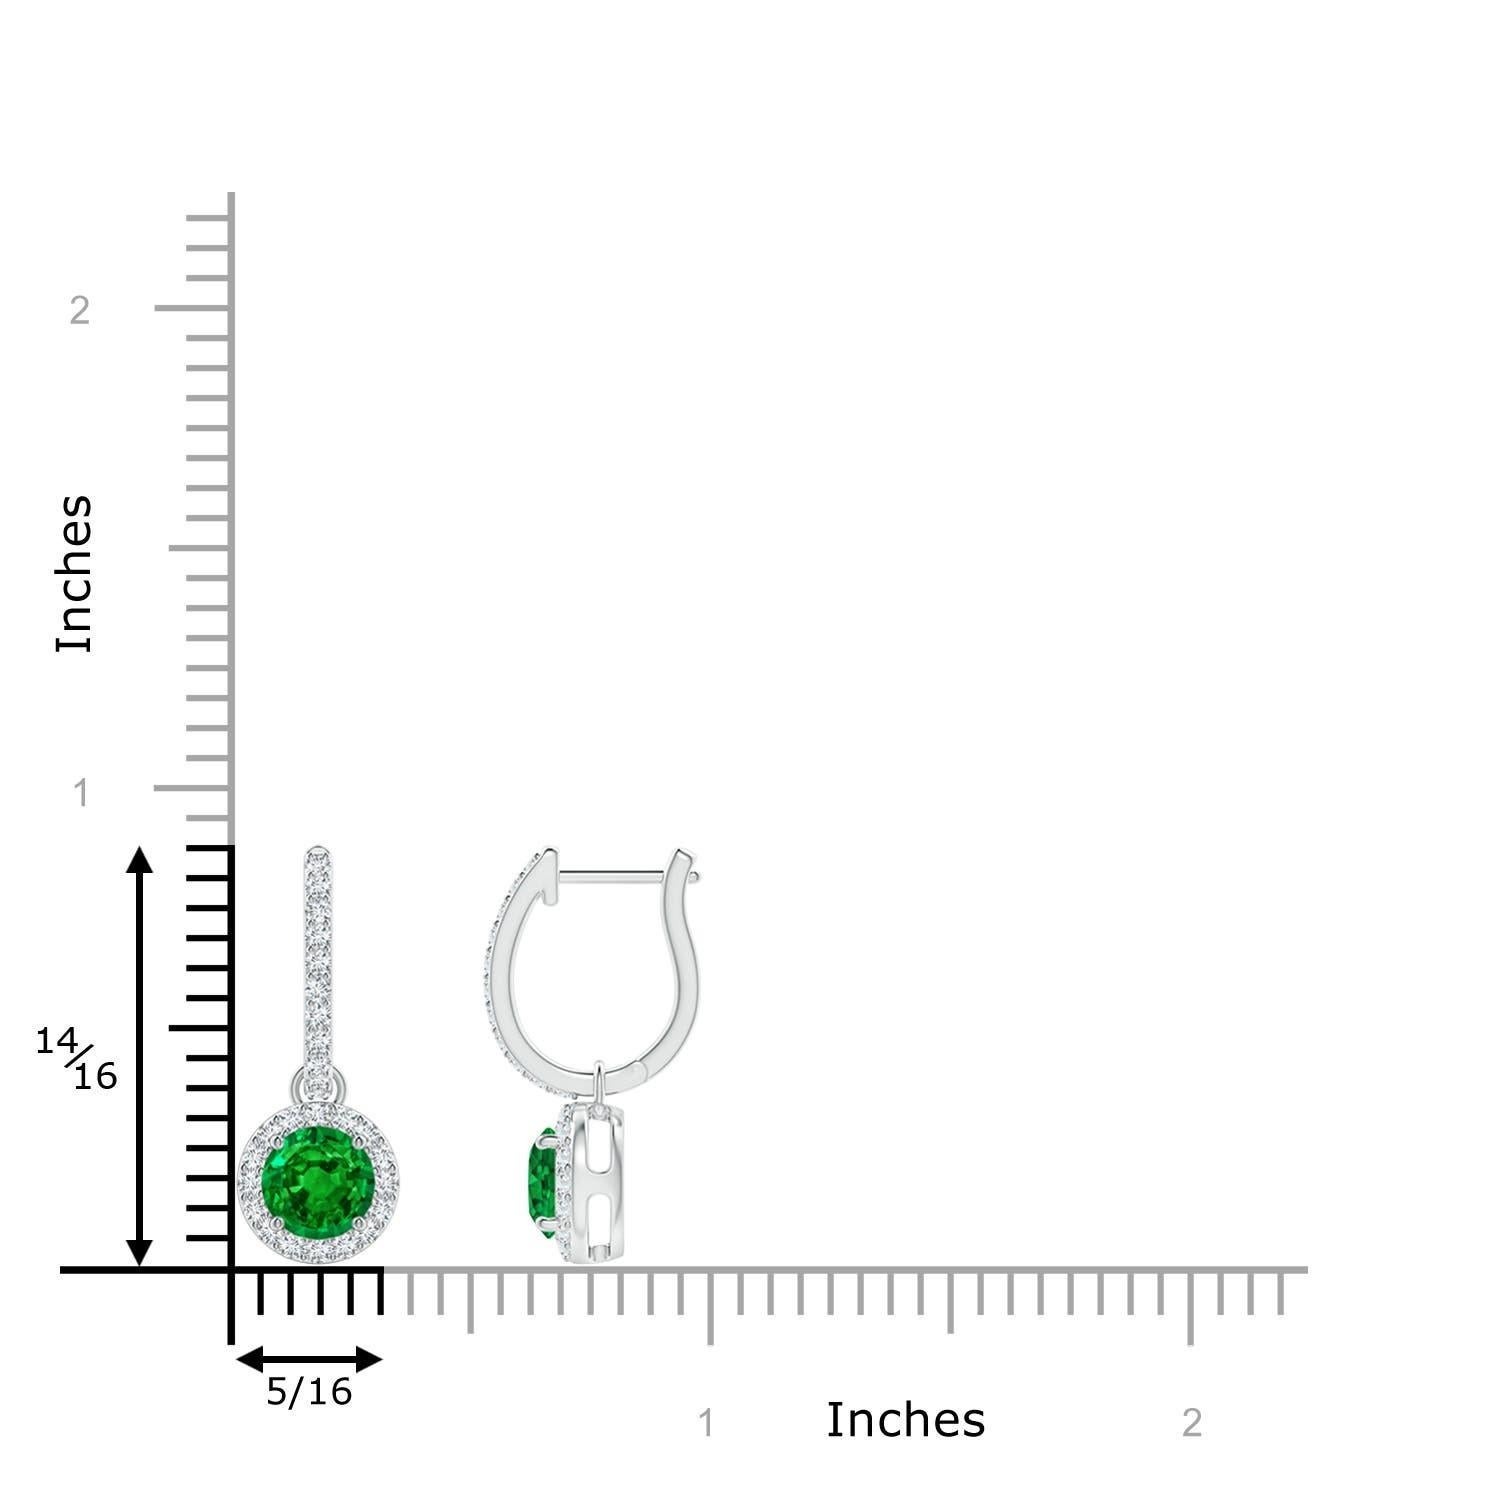 Nestled within a glimmering halo of round diamonds are round lush green emeralds in prong settings. The diamond accents on the hoop lend an additional touch of elegance to these emerald dangle earrings crafted in platinum.
Emerald is the Birthstone